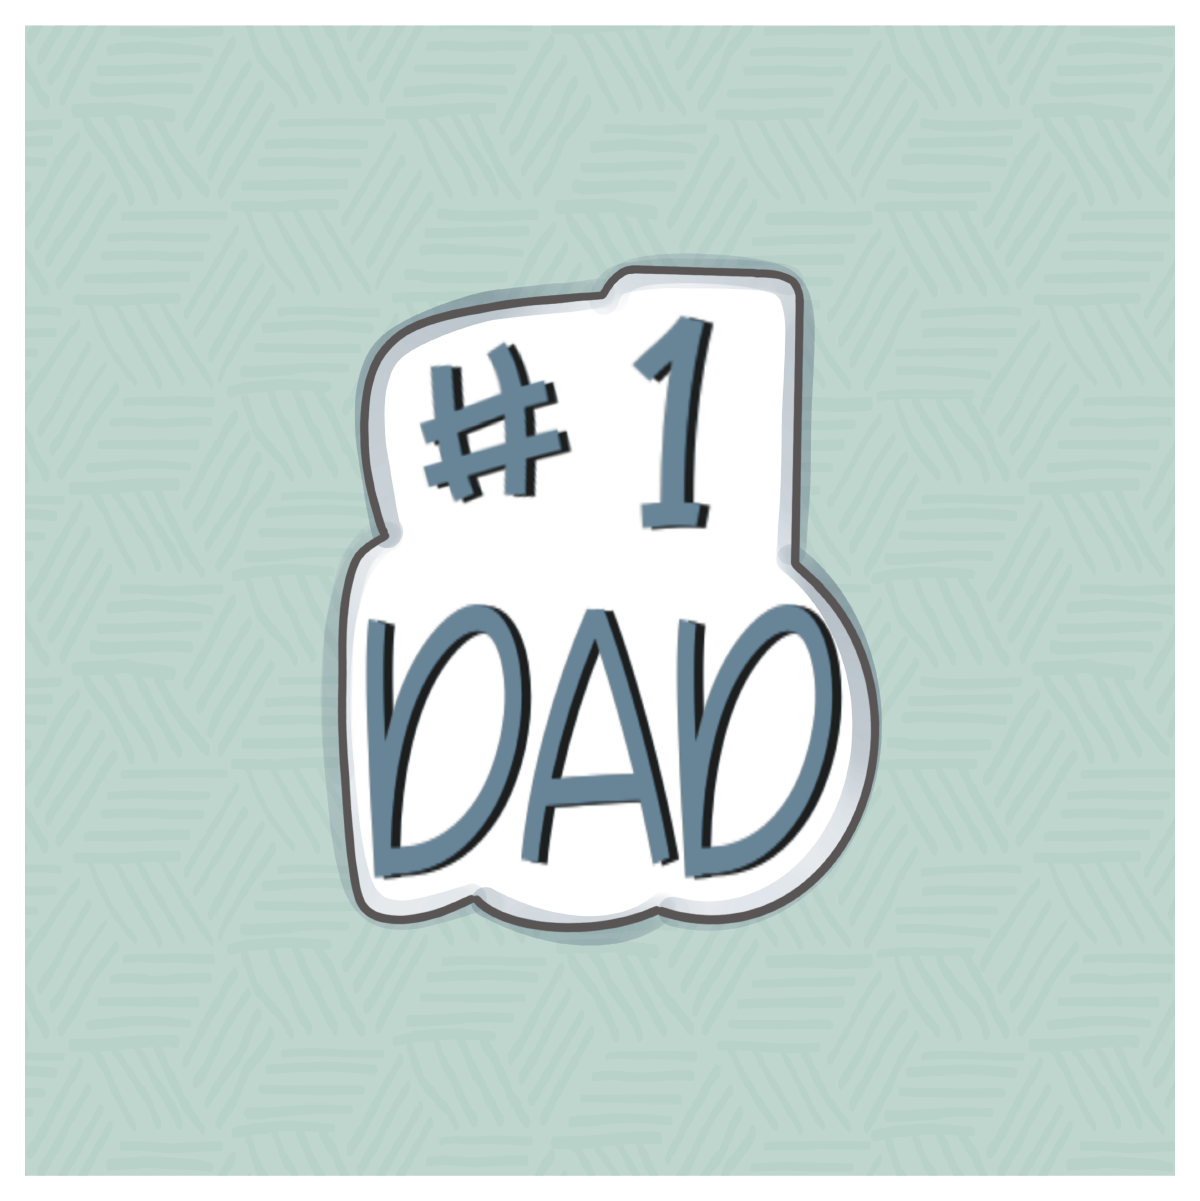 Number 1 Dad Hand Lettered Cookie Cutter